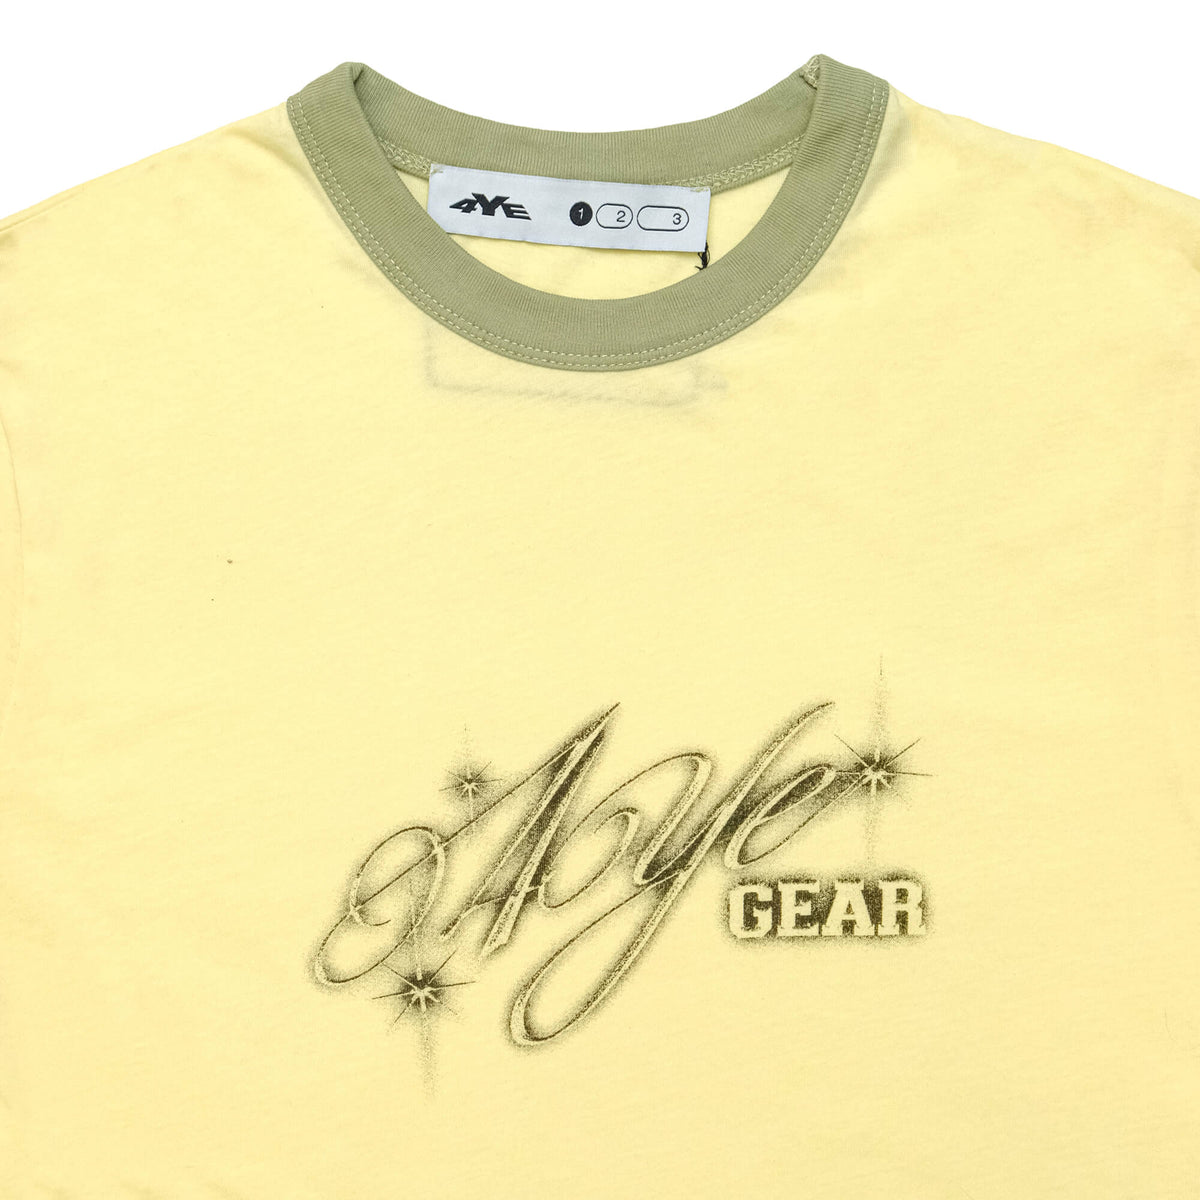 Close up image of starry night ringer tee highlighting the starry night logo, which reads "4YE gear"